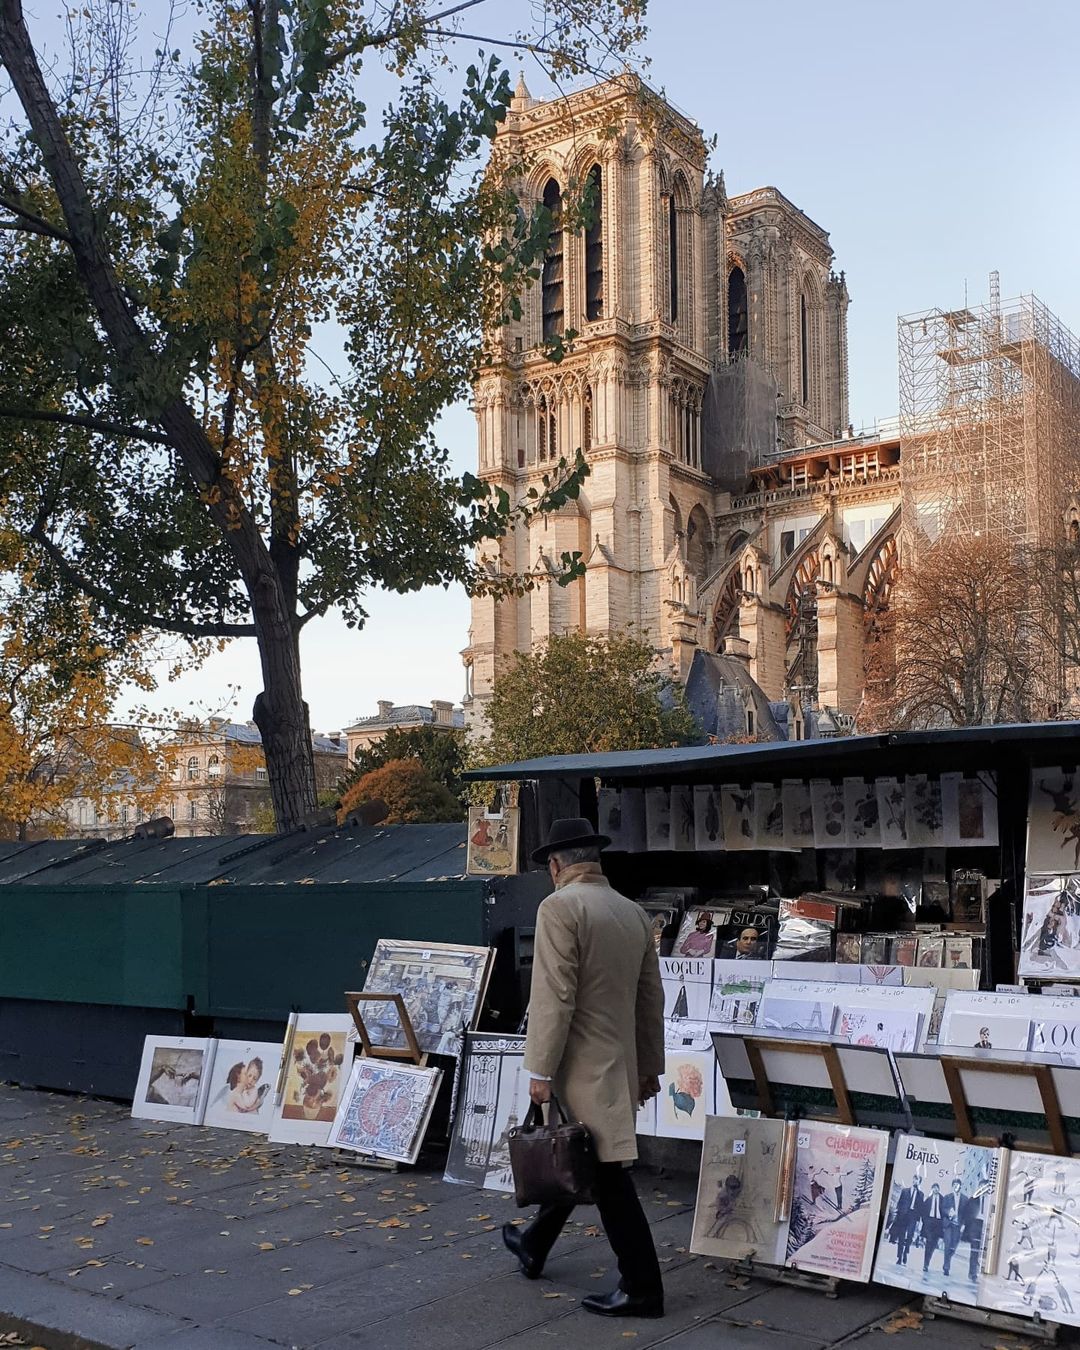 A man walks by the street vendors hawking vintage inspired art and antique books in Paris while the Notre Dame sits in the background